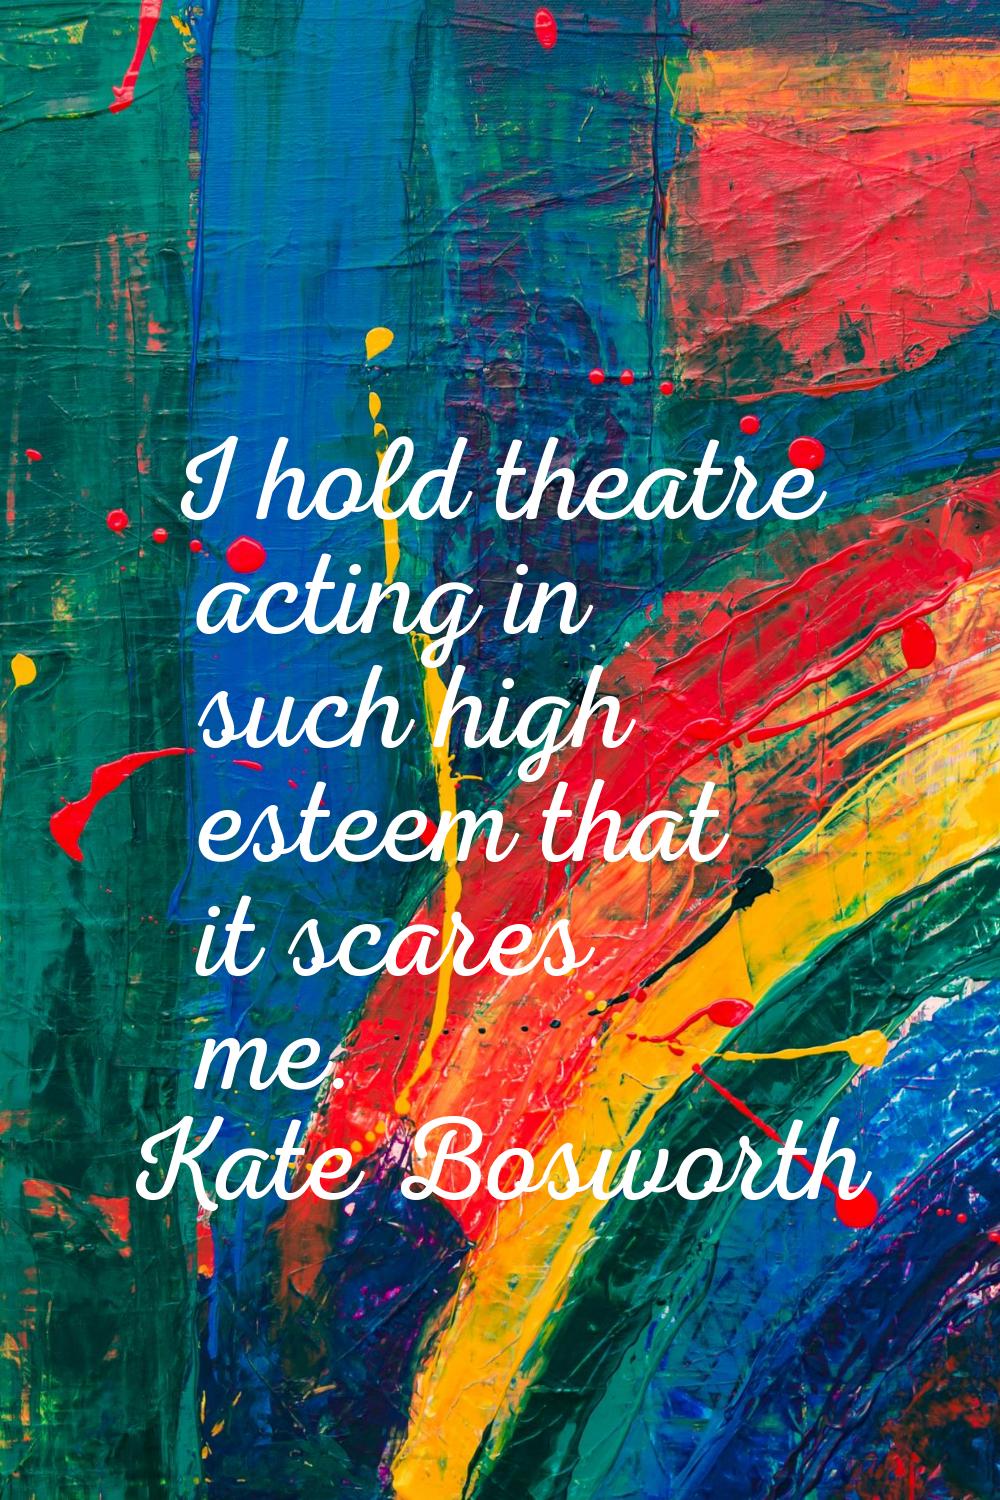 I hold theatre acting in such high esteem that it scares me.